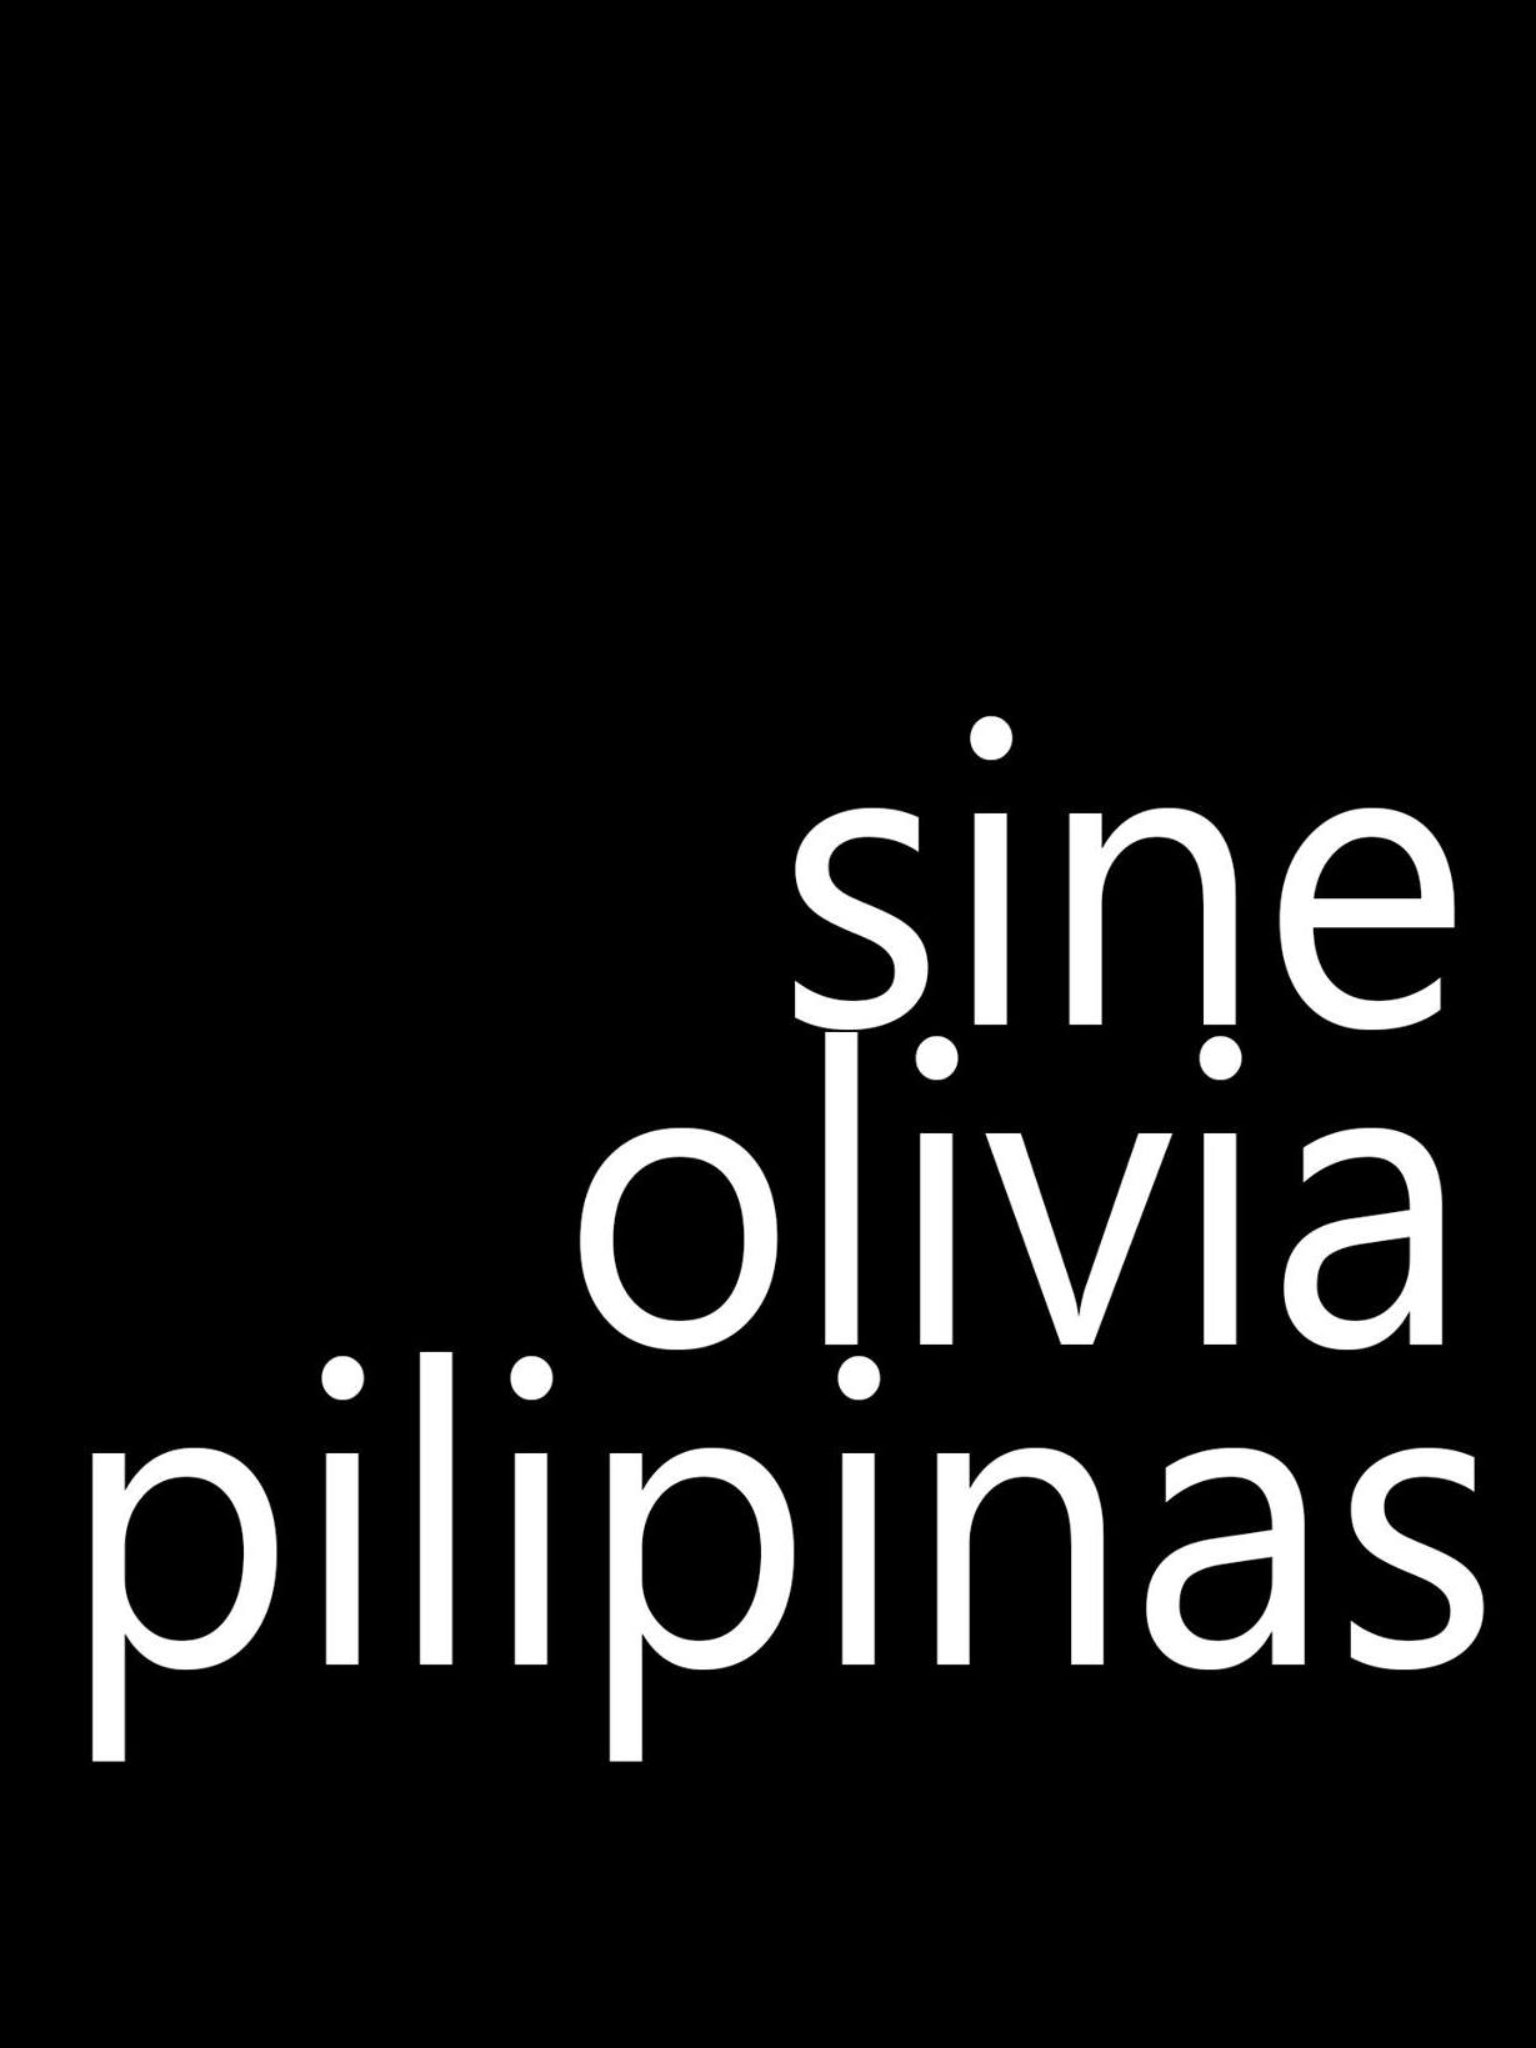 Official Twitter handle of Lav Diaz's production company, sine olivia pilipinas. Corporate account.